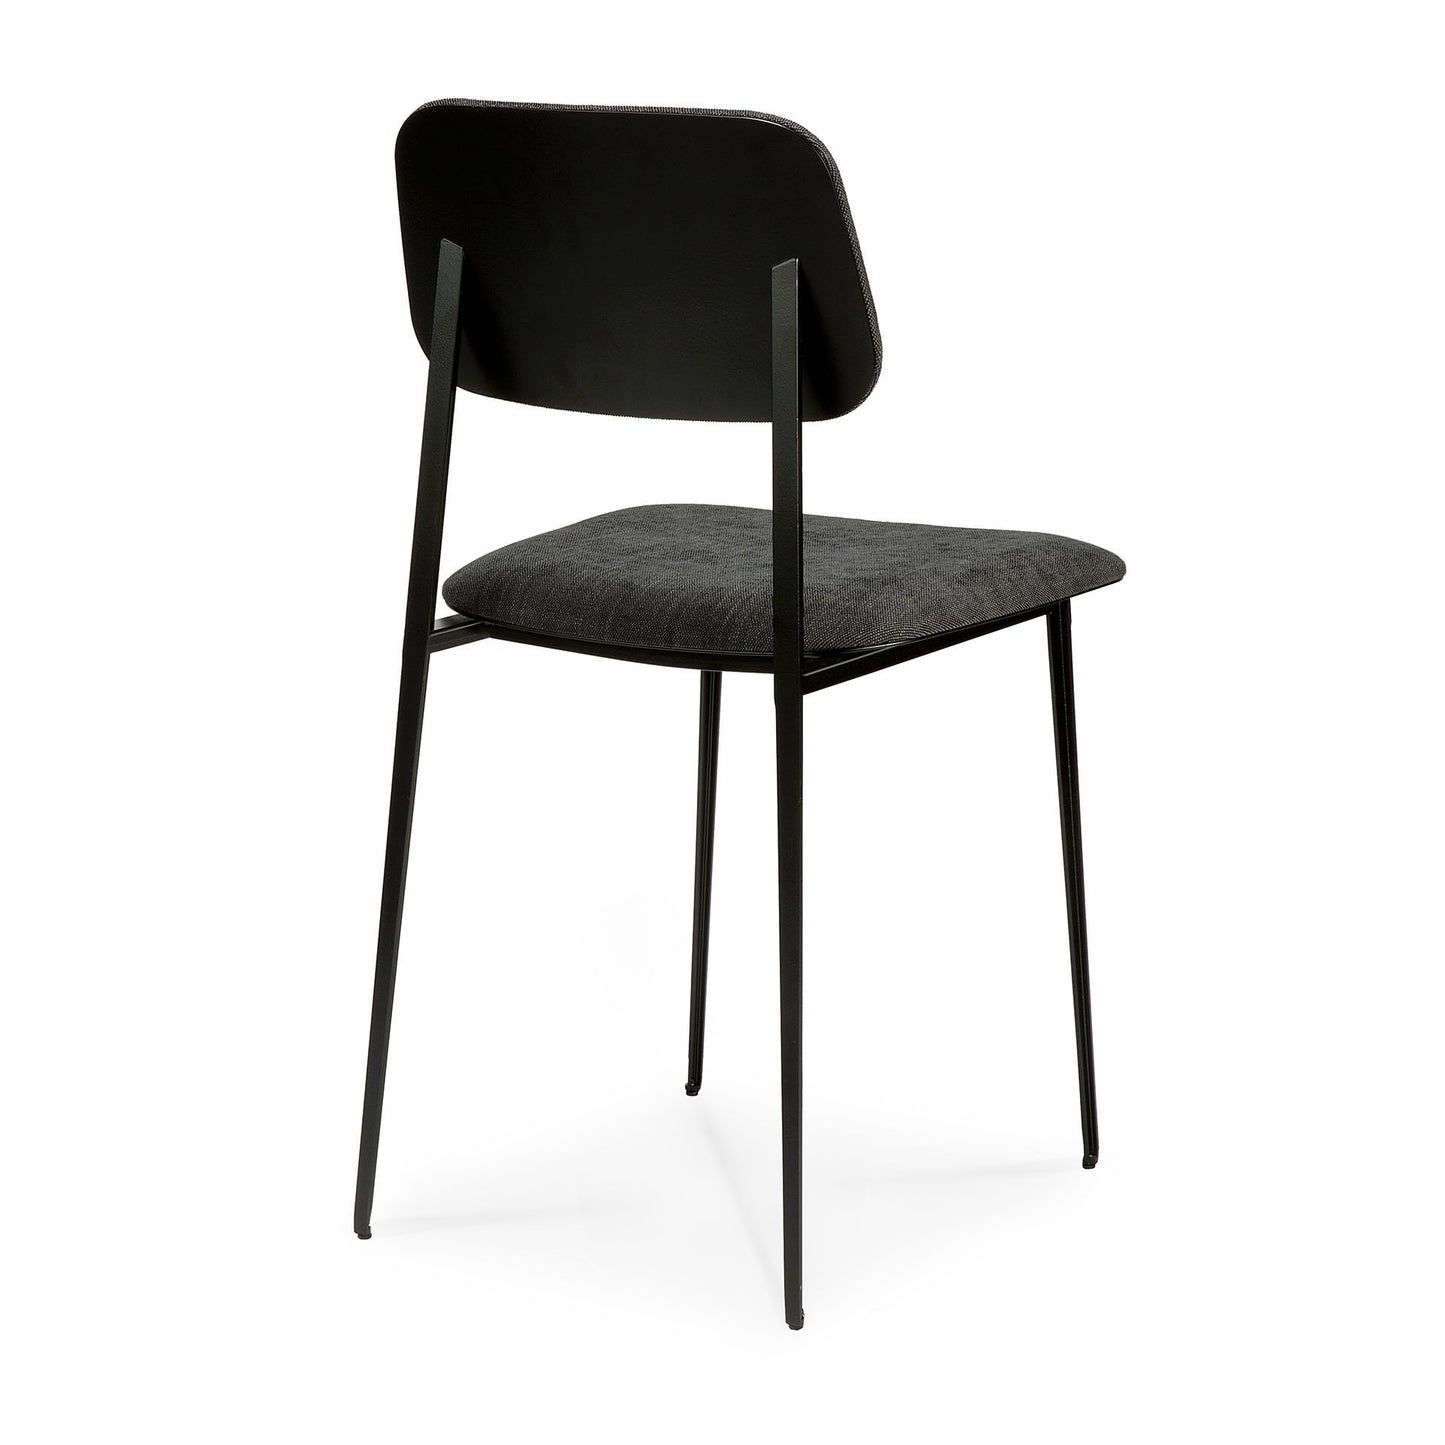 Load image into Gallery viewer, DC Dining Chair By Djordje Cukanovic | Dark Grey
